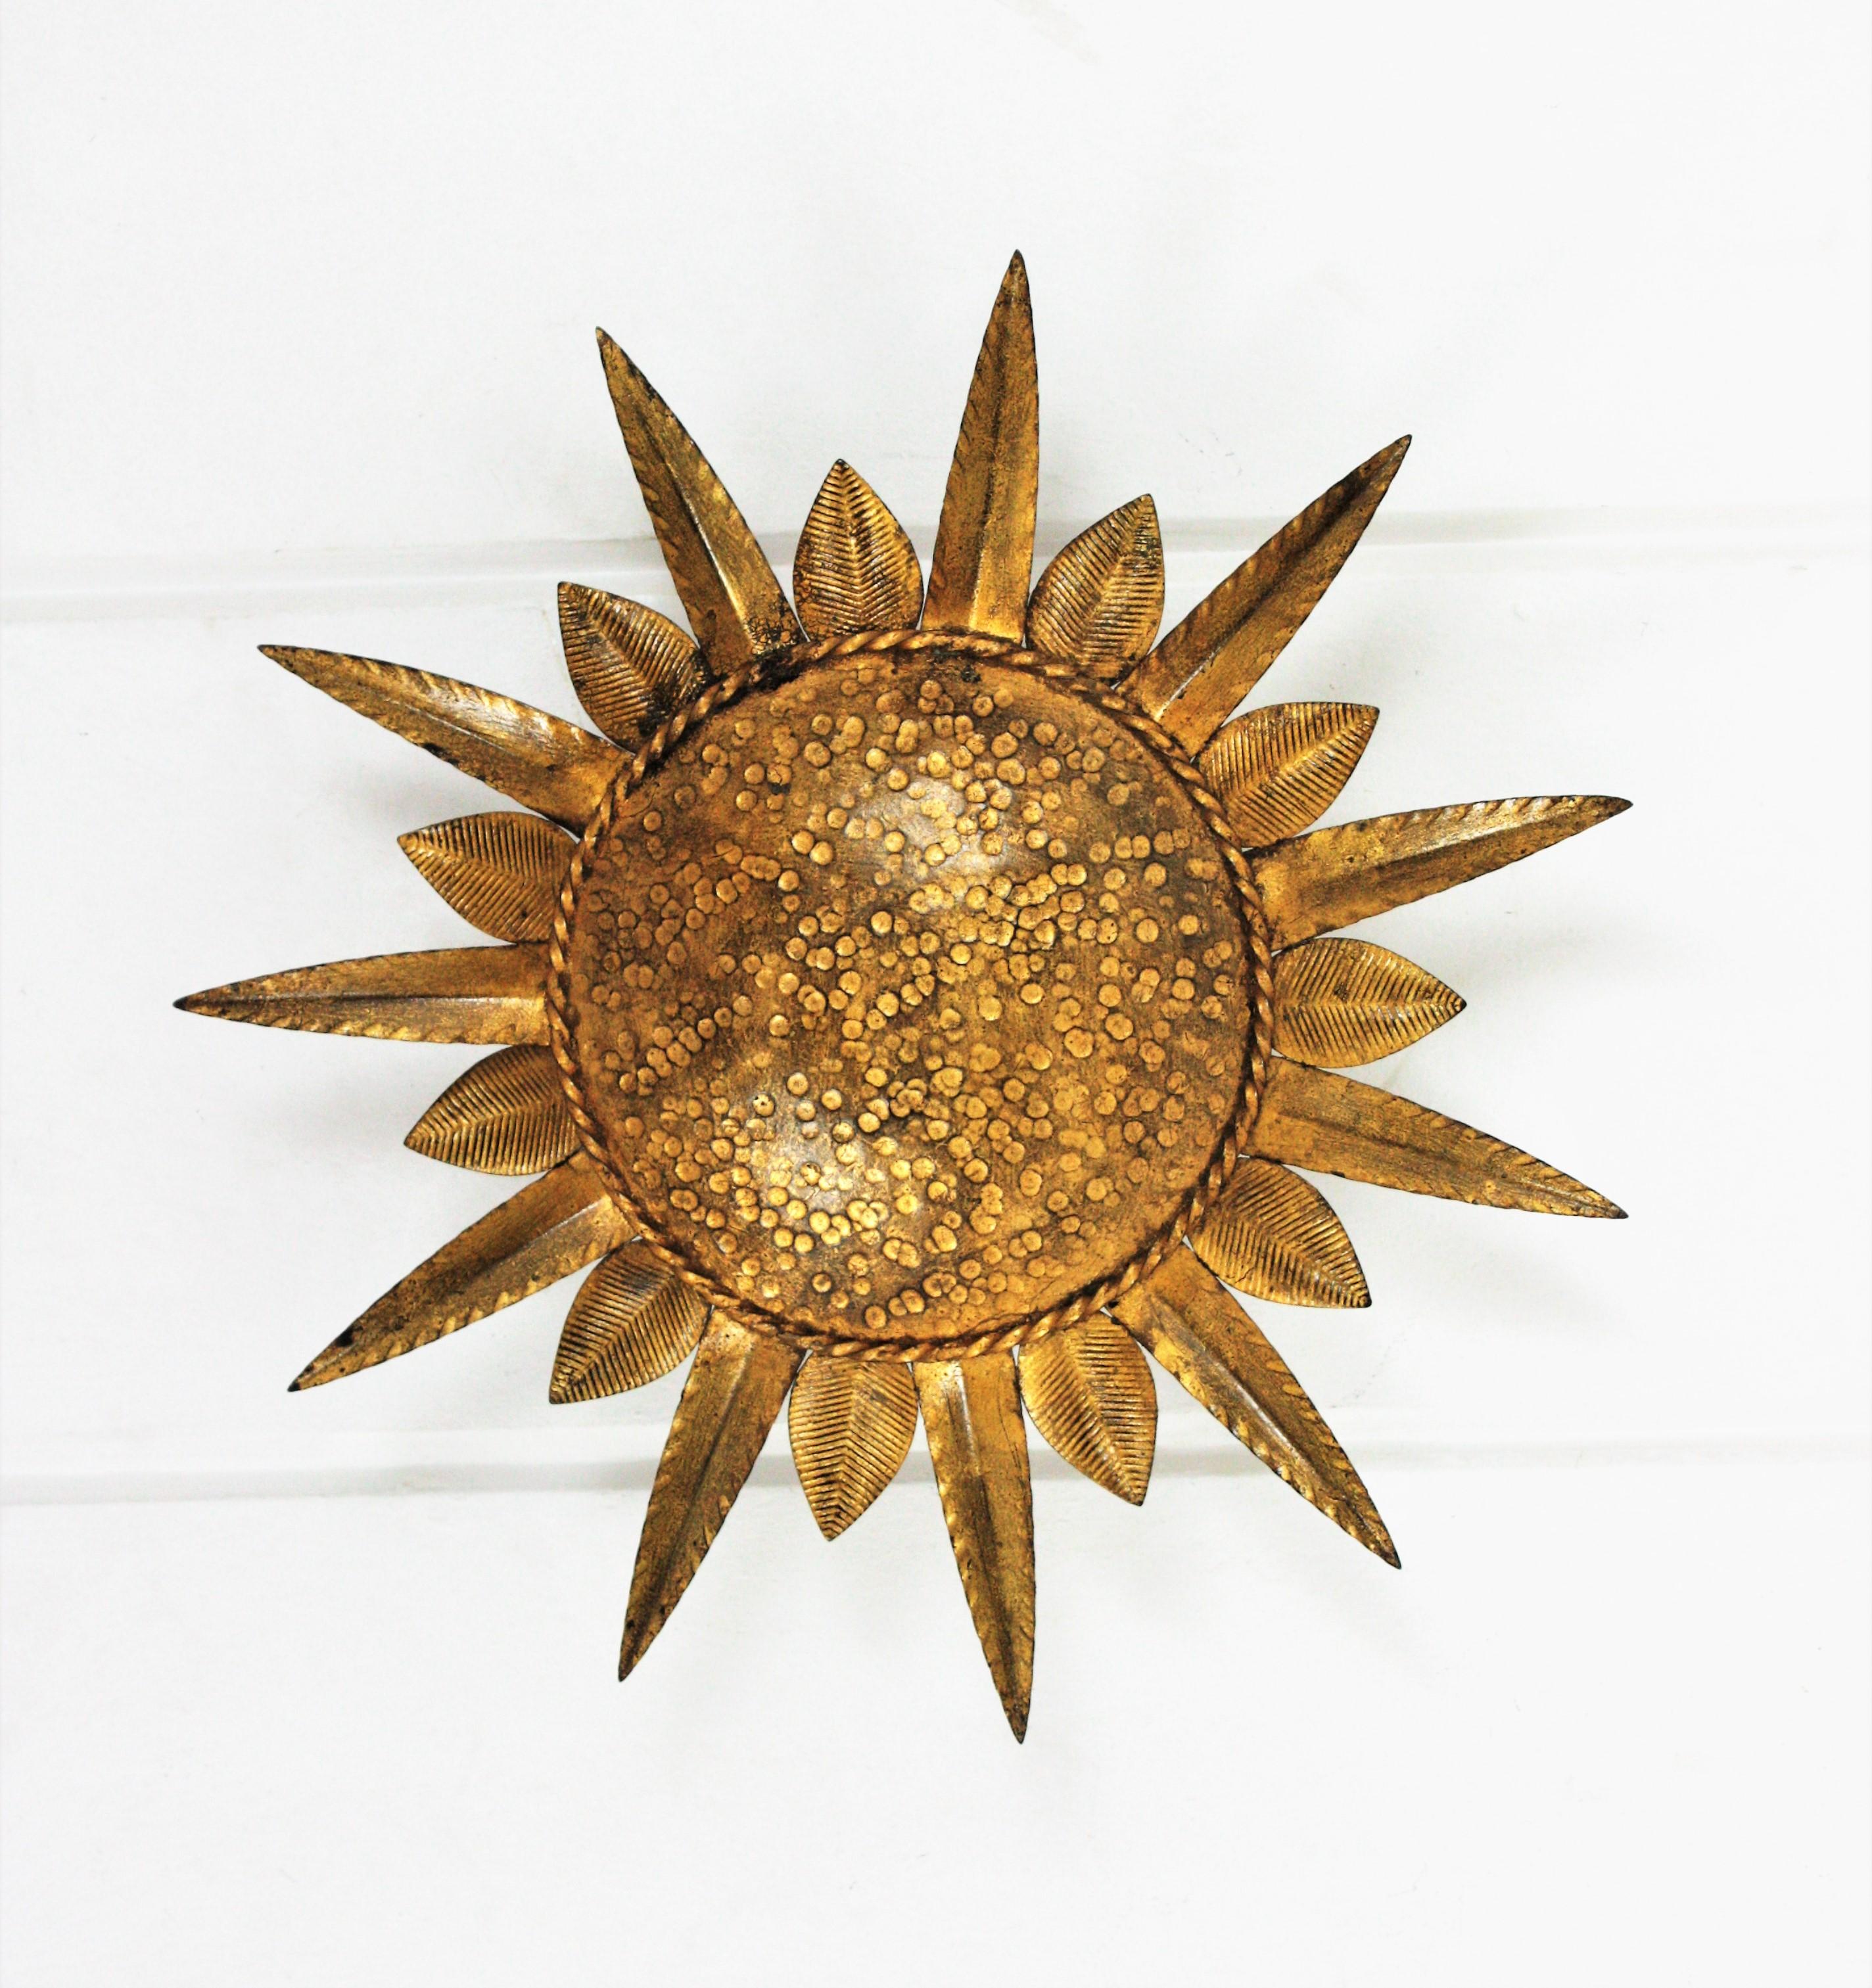 Lovely gold leaf gilt iron leafed sunburst flush mount. Manufactured by Ferro-Art. Spain, 1950s-1960s.
This ceiling flushmount features an iron structure with a central round panel framed by alternating short and long leaves
The central part is